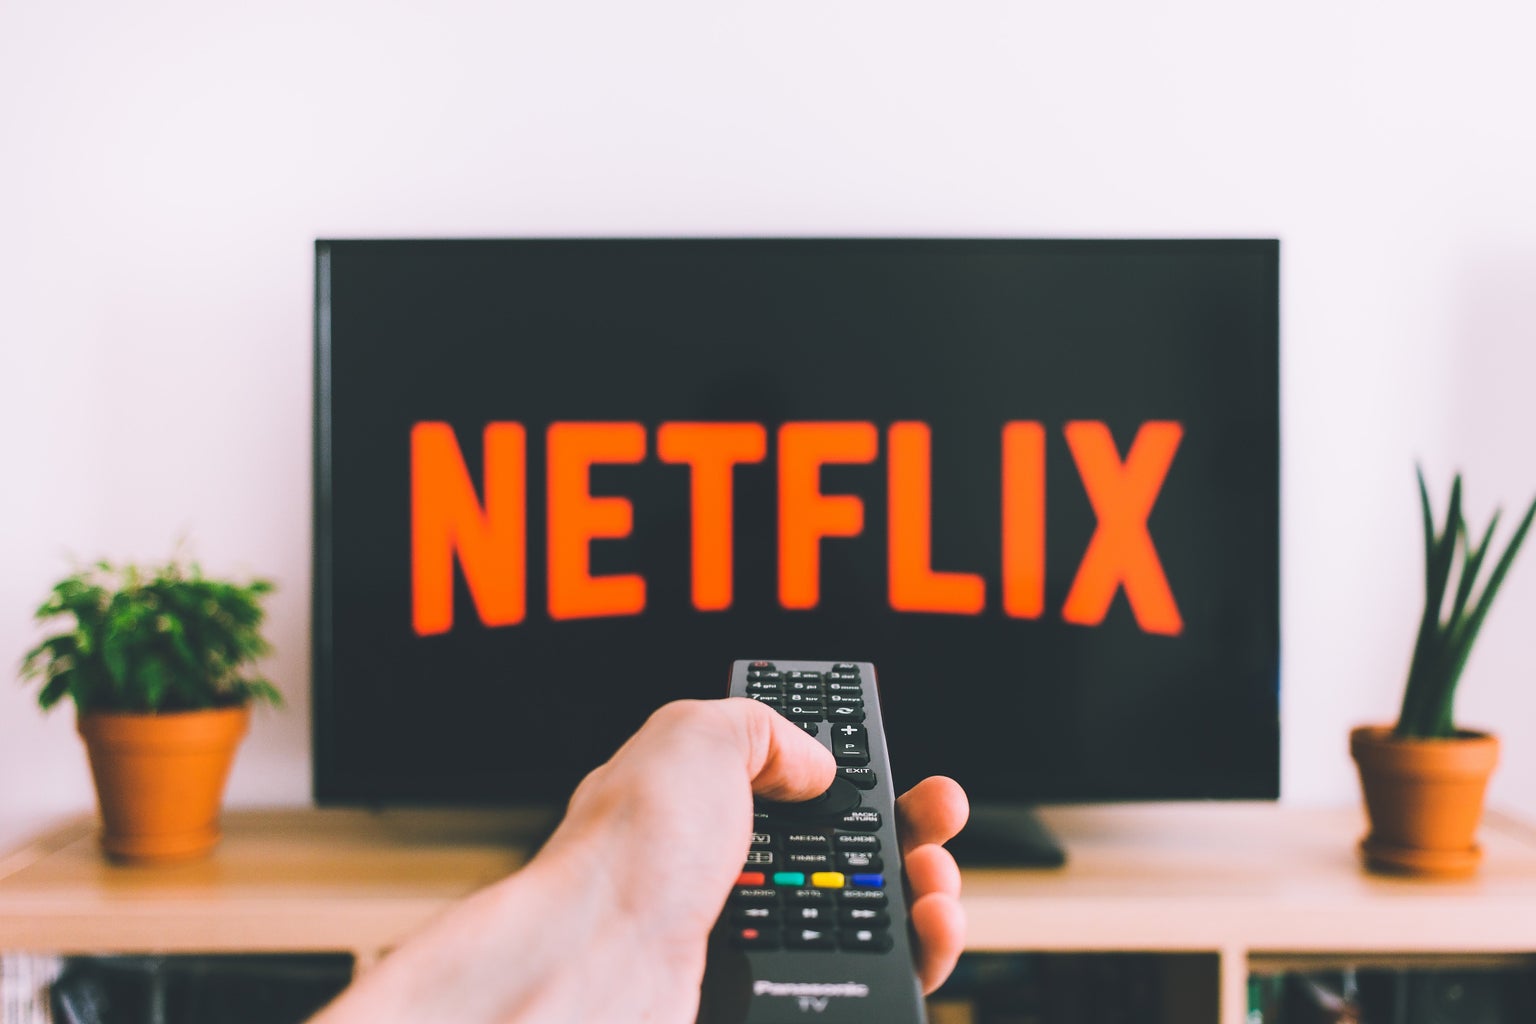 Person pointing remote at a TV that is displaying Netflix